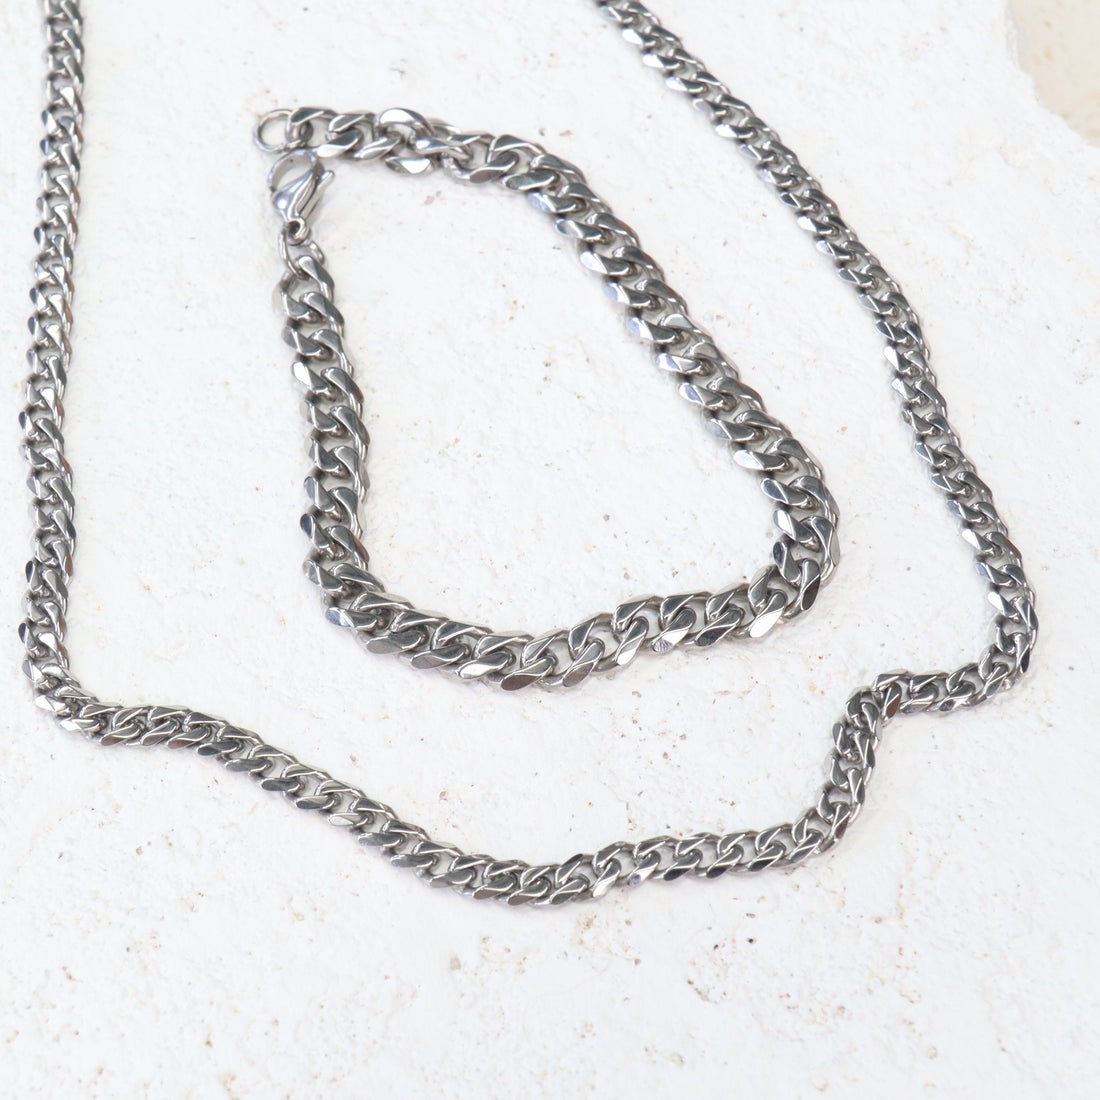 Cuban Stainless Steel Chain Necklace